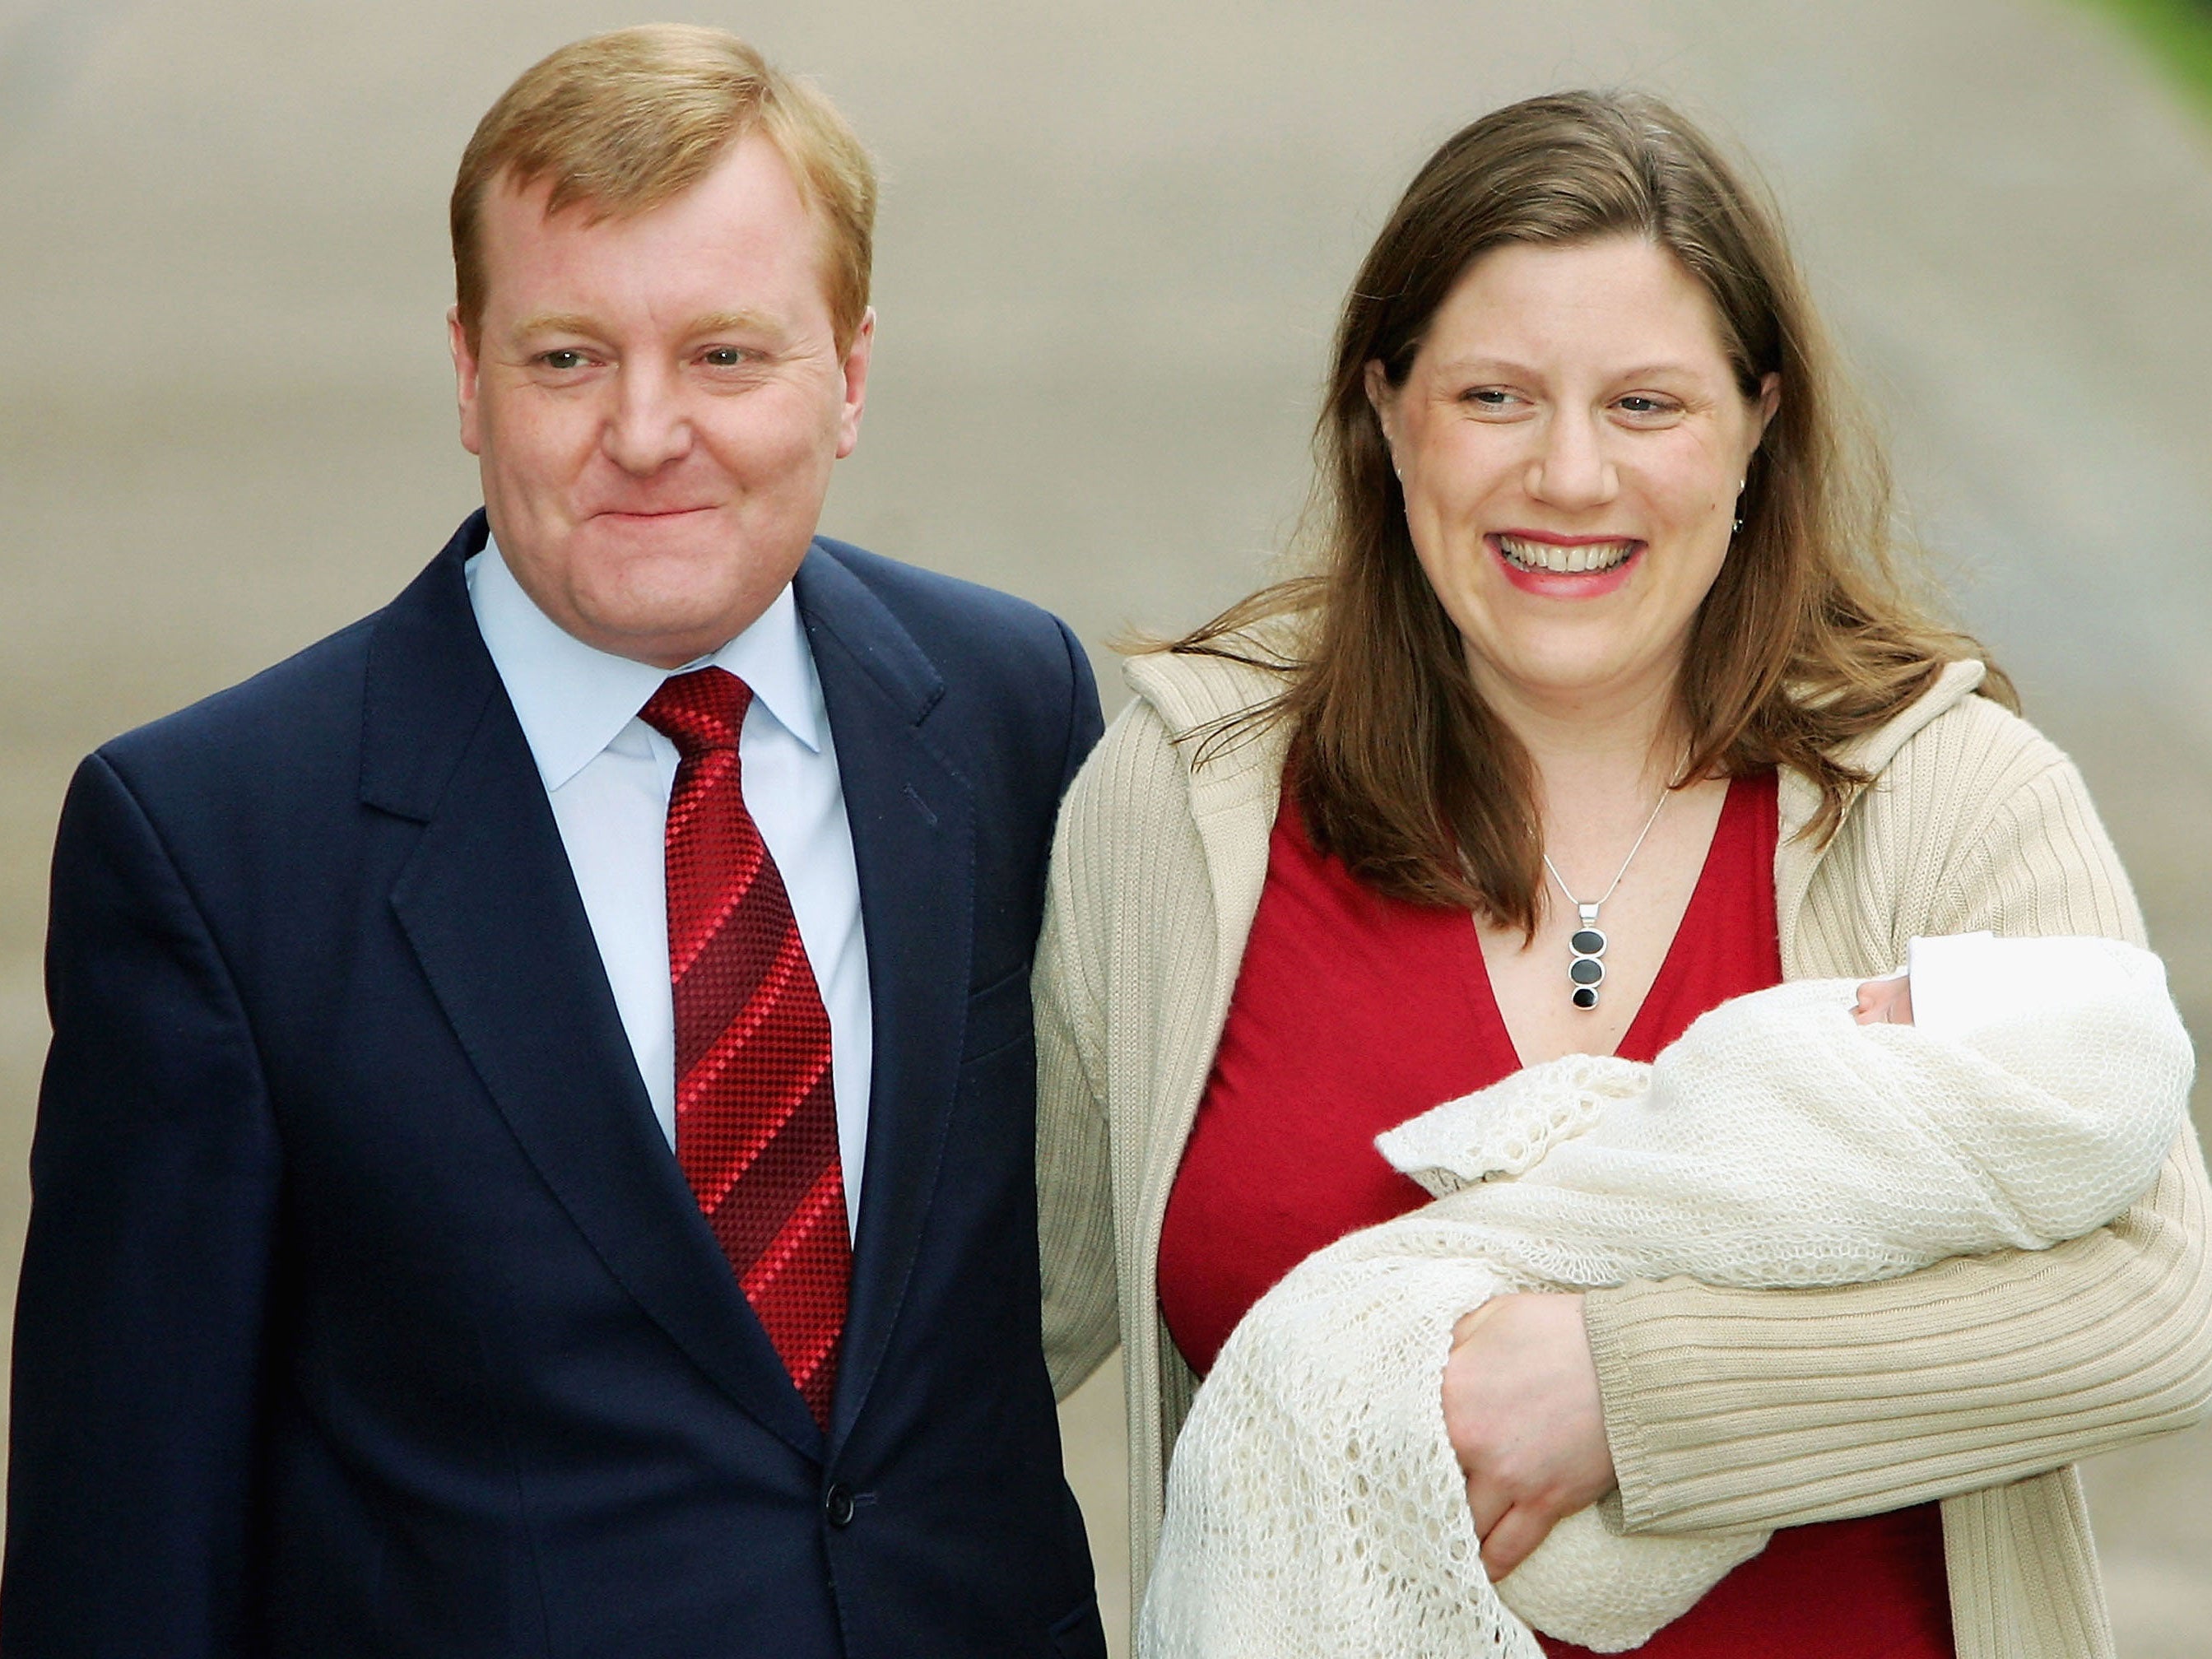 Charles Kennedy poses with his then wife Sarah and new born son Donald James on 12 April 2005